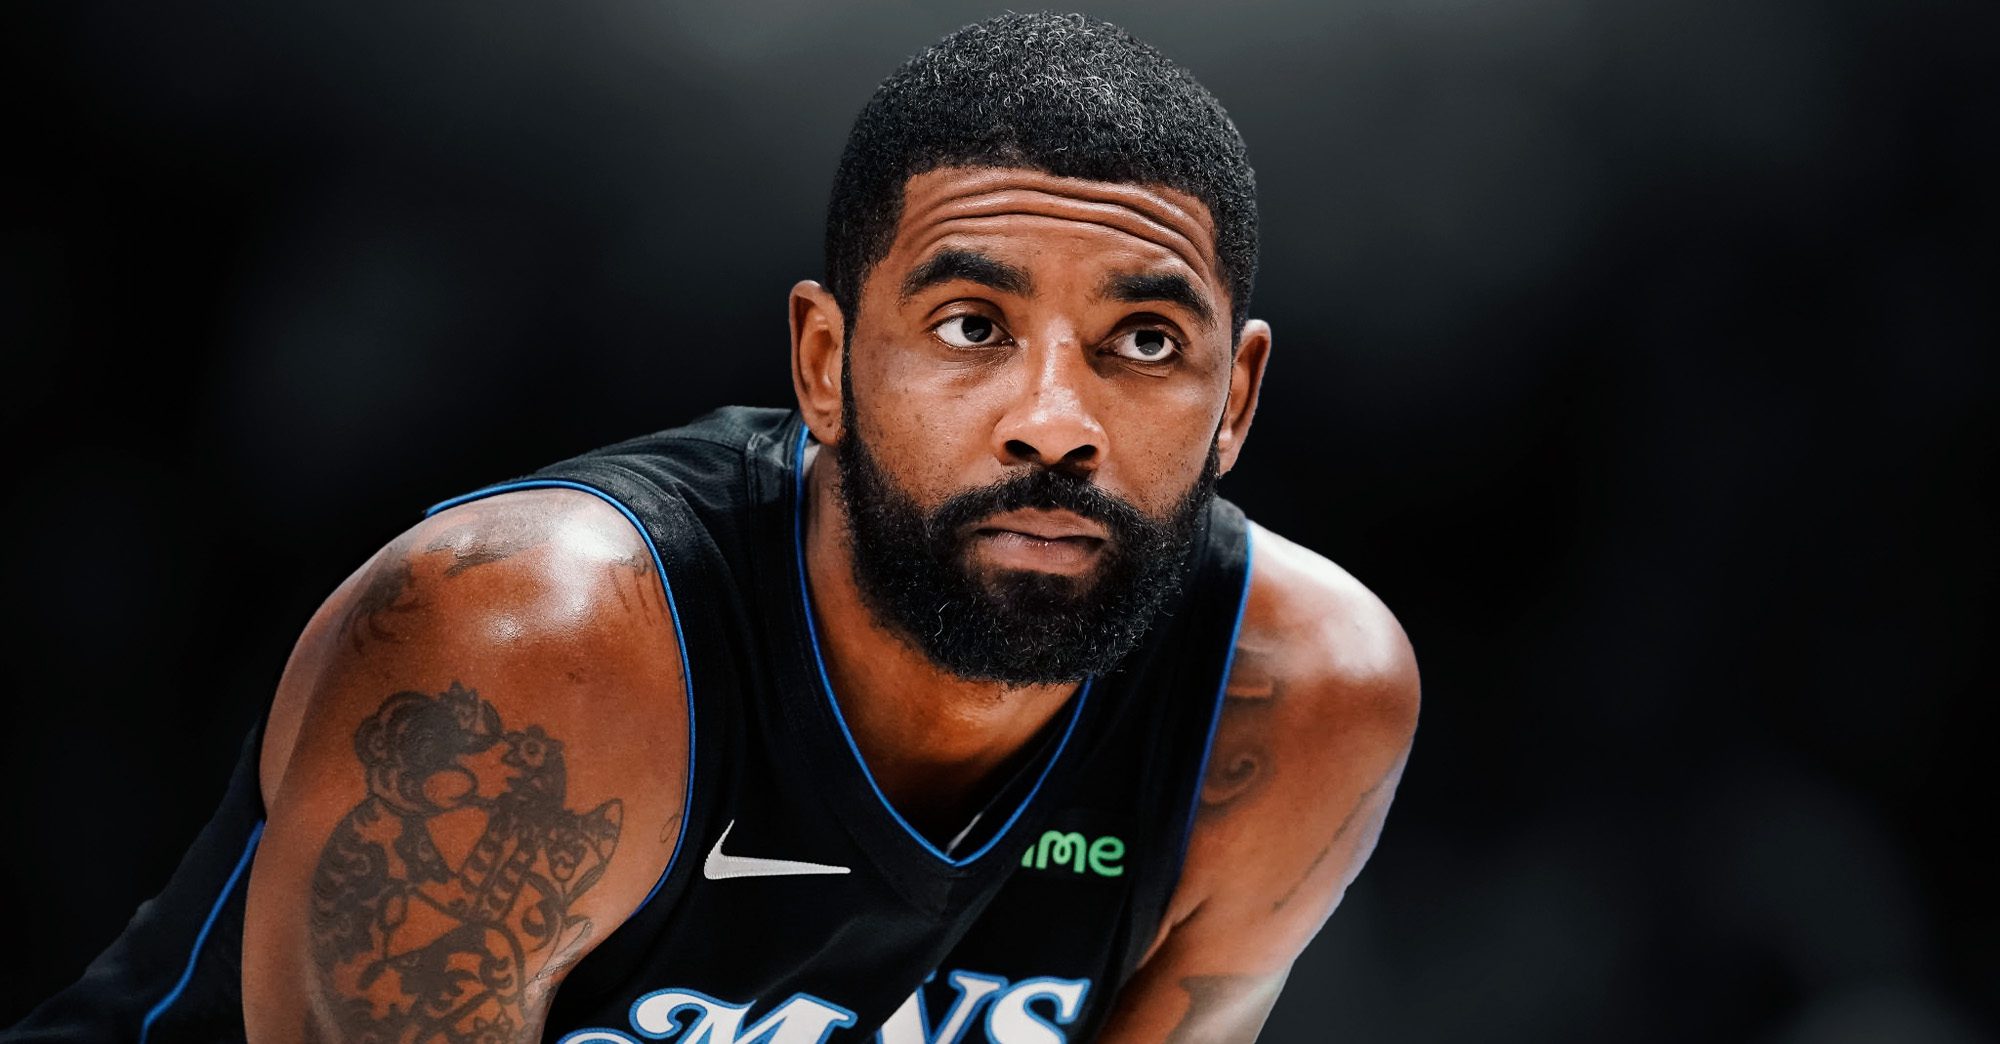 Kyrie Irving Responds to Claims He Had Jewish Signs Removed From NBA Game